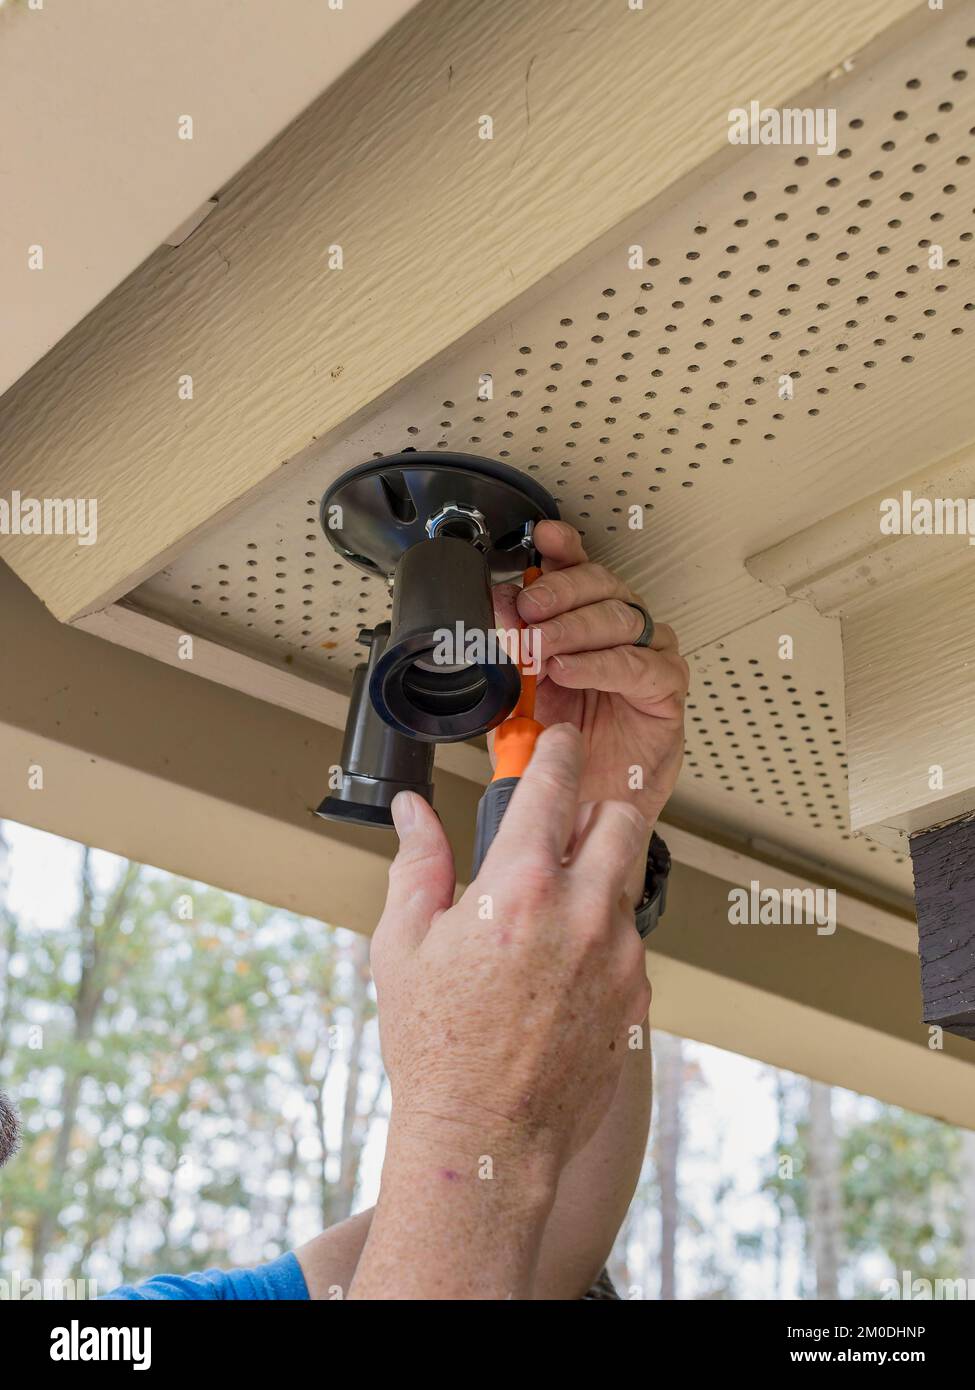 Electrician or handyman at work installing outside security lights or lighting on a residential home for home security. Stock Photo